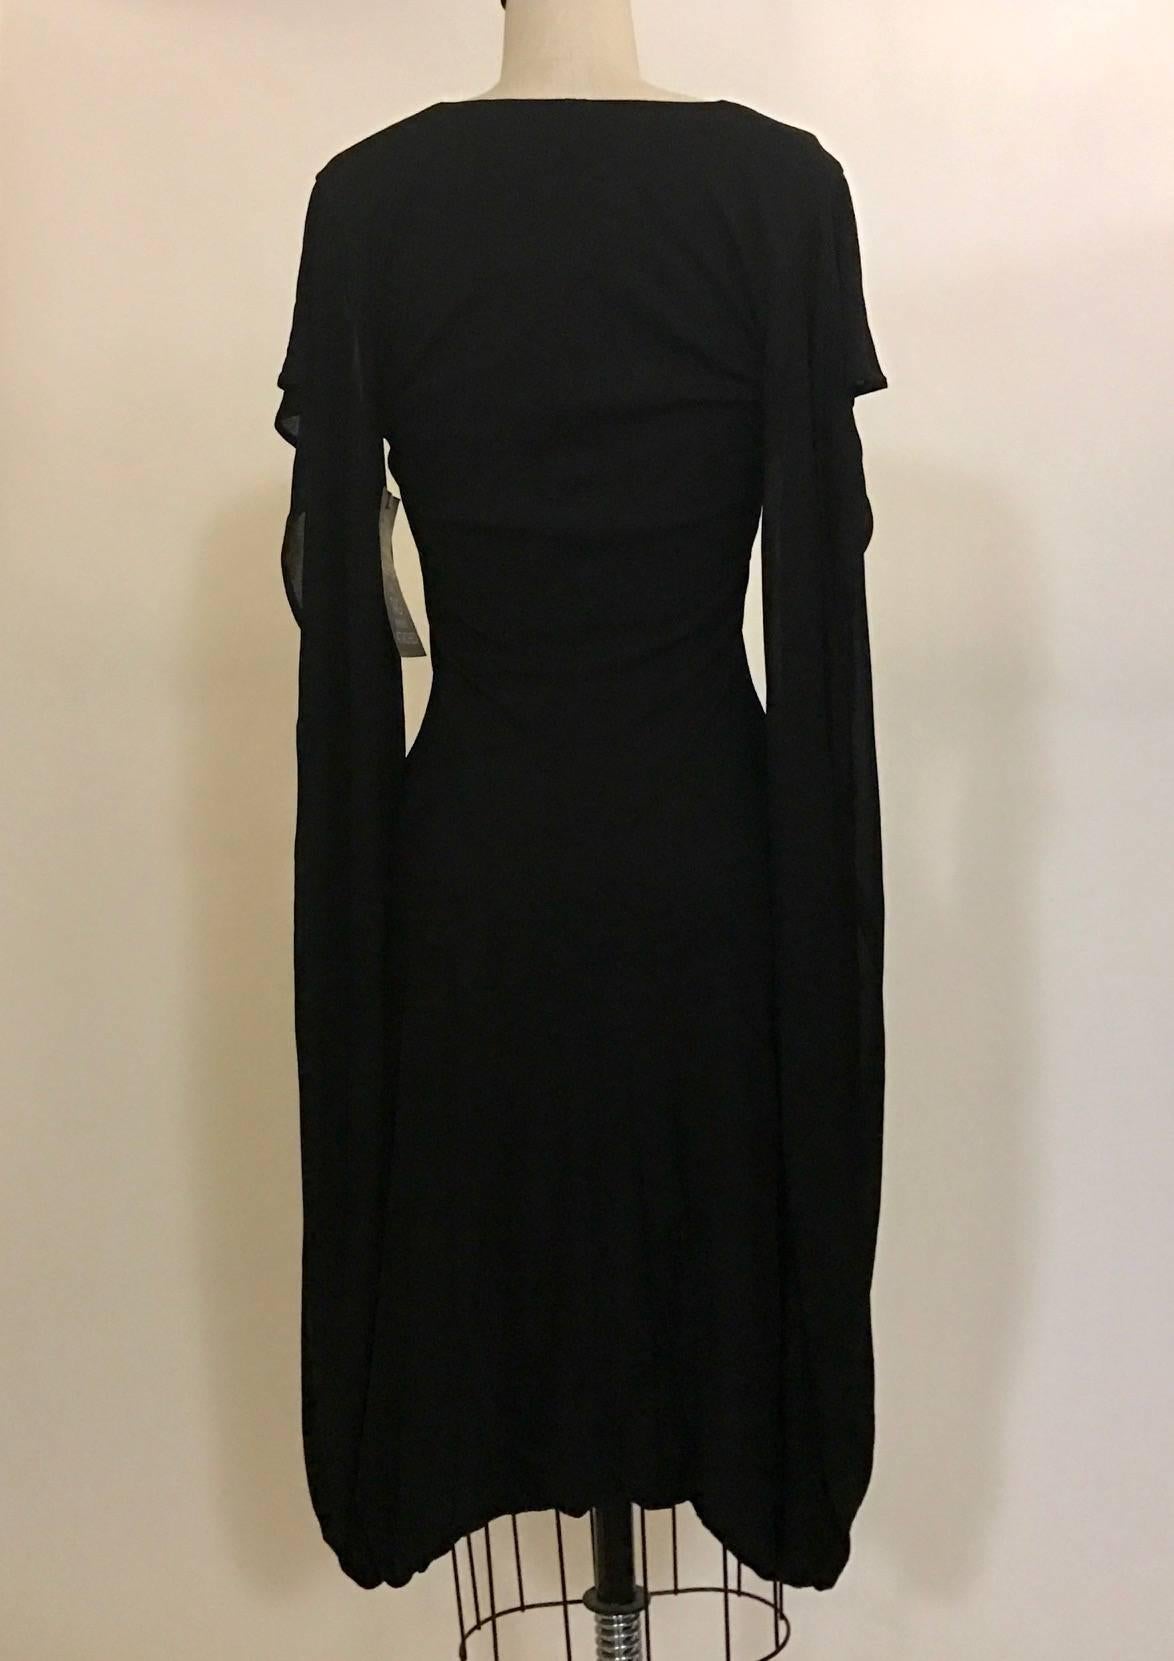 Alexander McQueen 2009 fitted black jersey v neck dress. A short bat-wing sleeve extends all the way down and connects to the draped skirt. Slight bubble hem. A true piece of cutting and draping genius!

100% rayon.

Made in Italy.

Labelled size IT